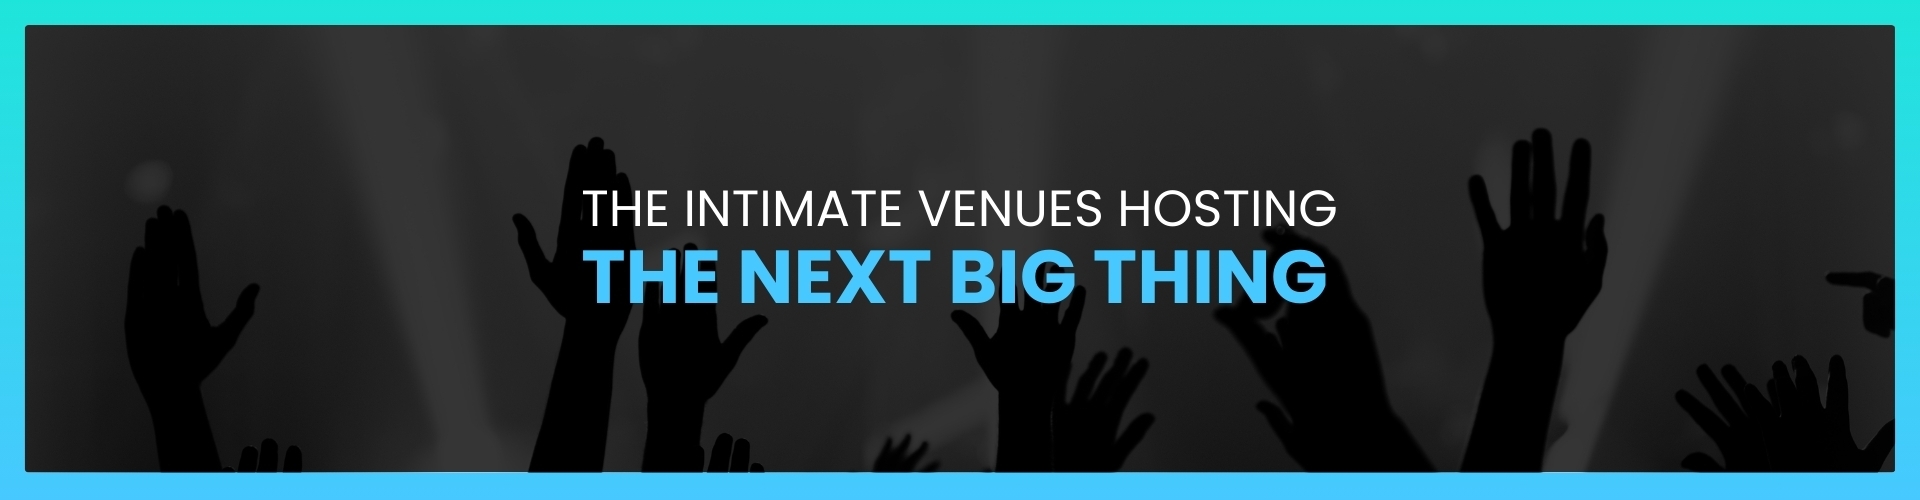 The Intimate Venues Hosting The Next Big Thing